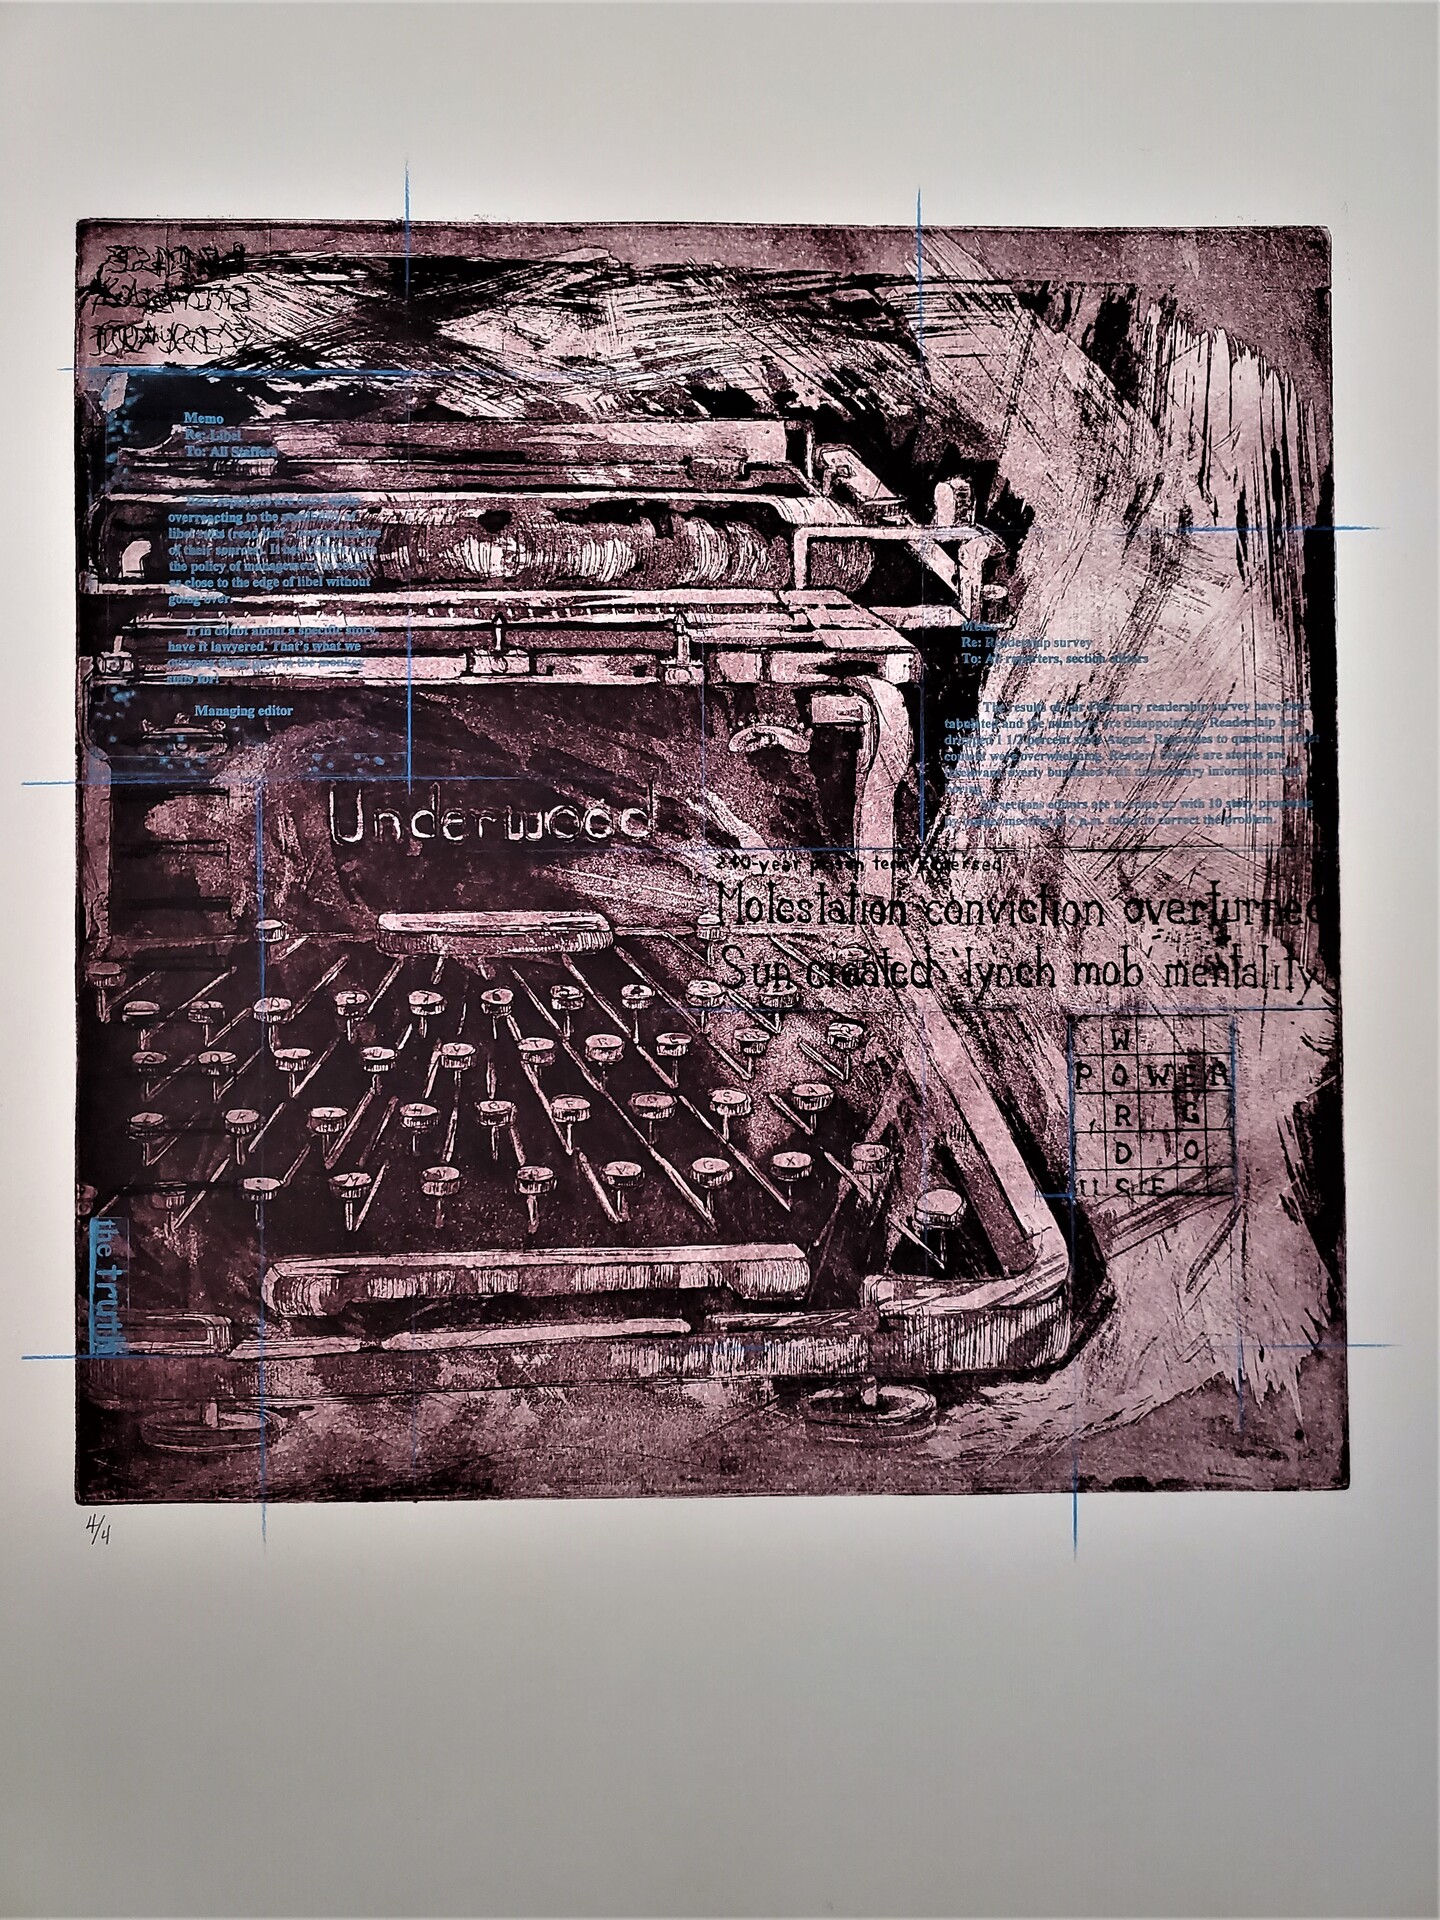 Christine Niswonger multiple plate etching of Underwood Typewriter depicting misuse and abuse of power she observed from her years as a reporter and editor.